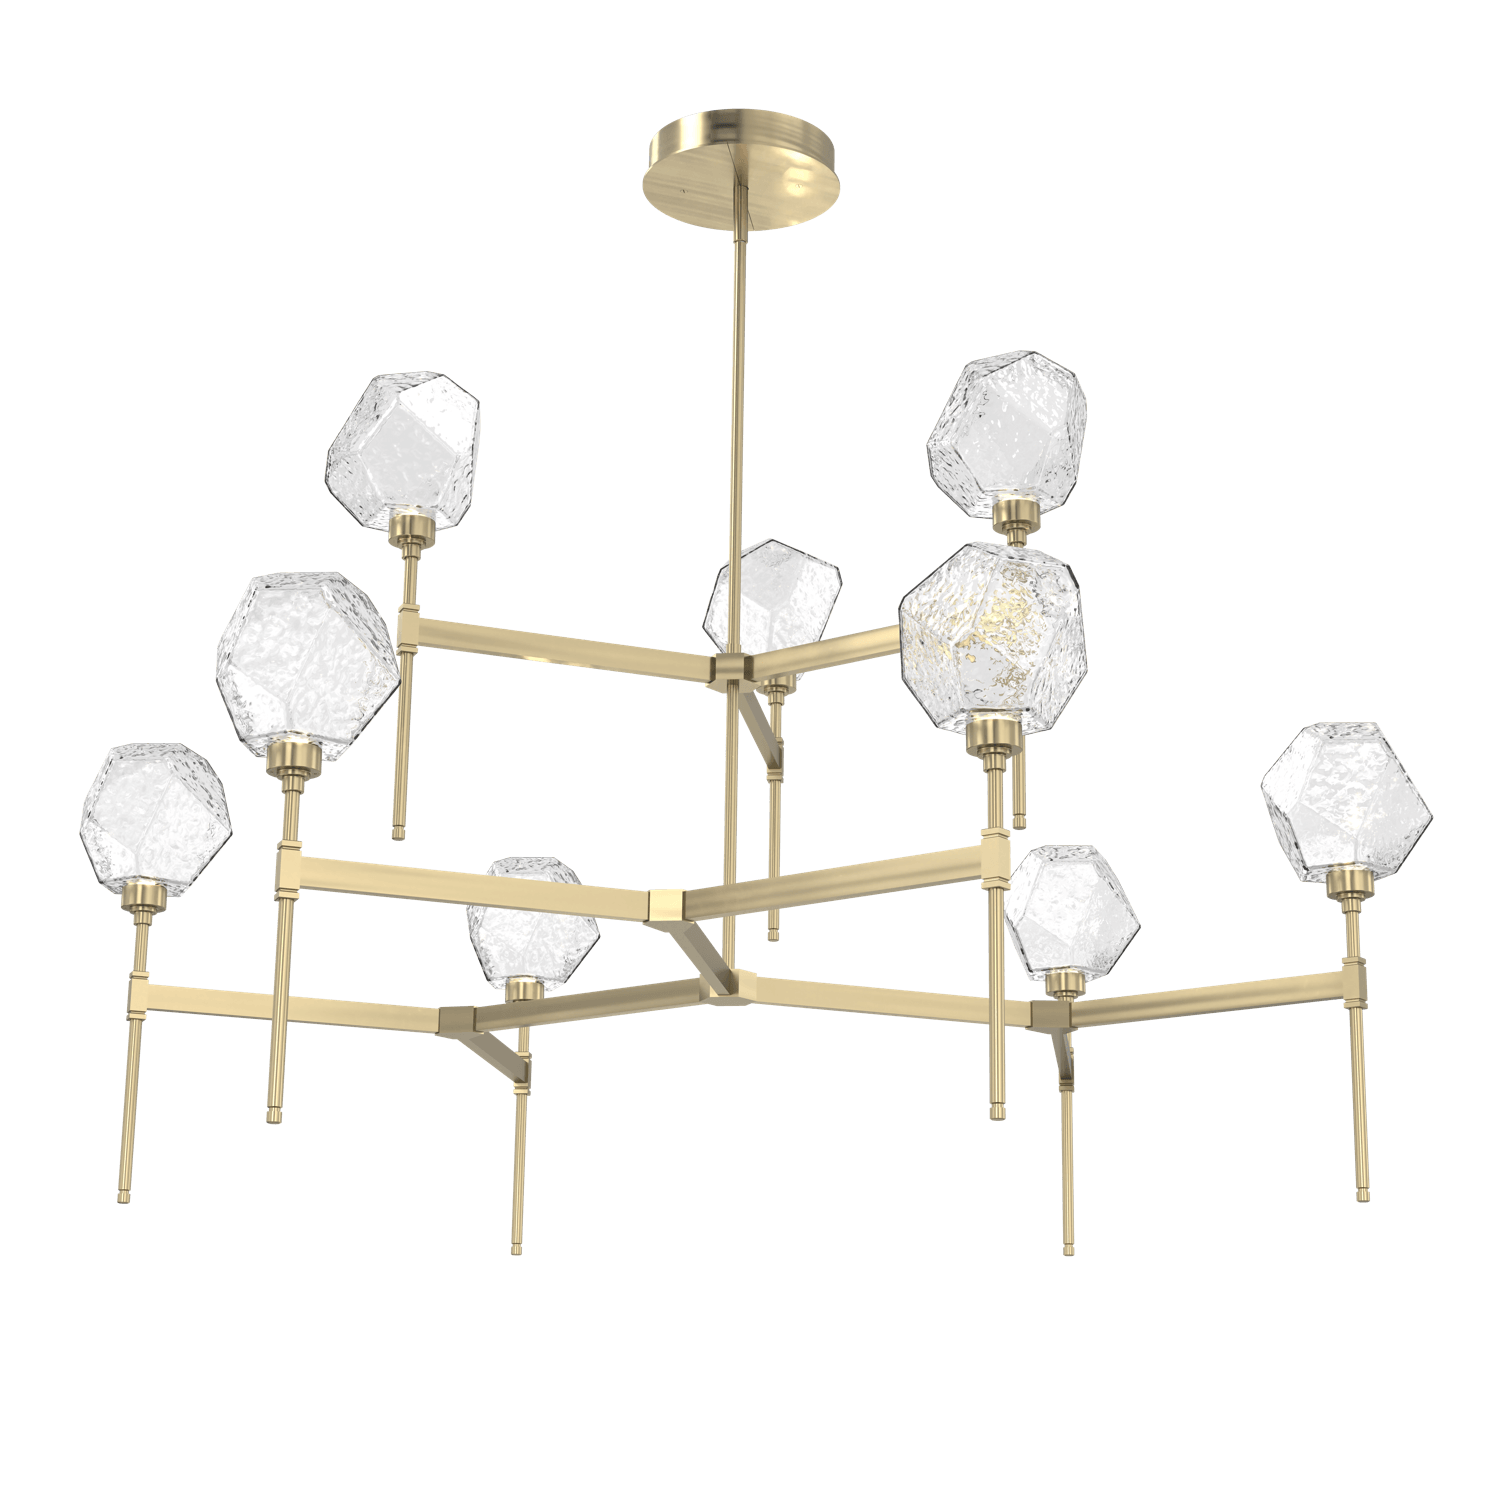 CHB0039-55-HB-C-Hammerton-Studio-Gem-round-two-tier-belvedere-chandelier-with-heritage-brass-finish-and-clear-blown-glass-shades-and-LED-lamping